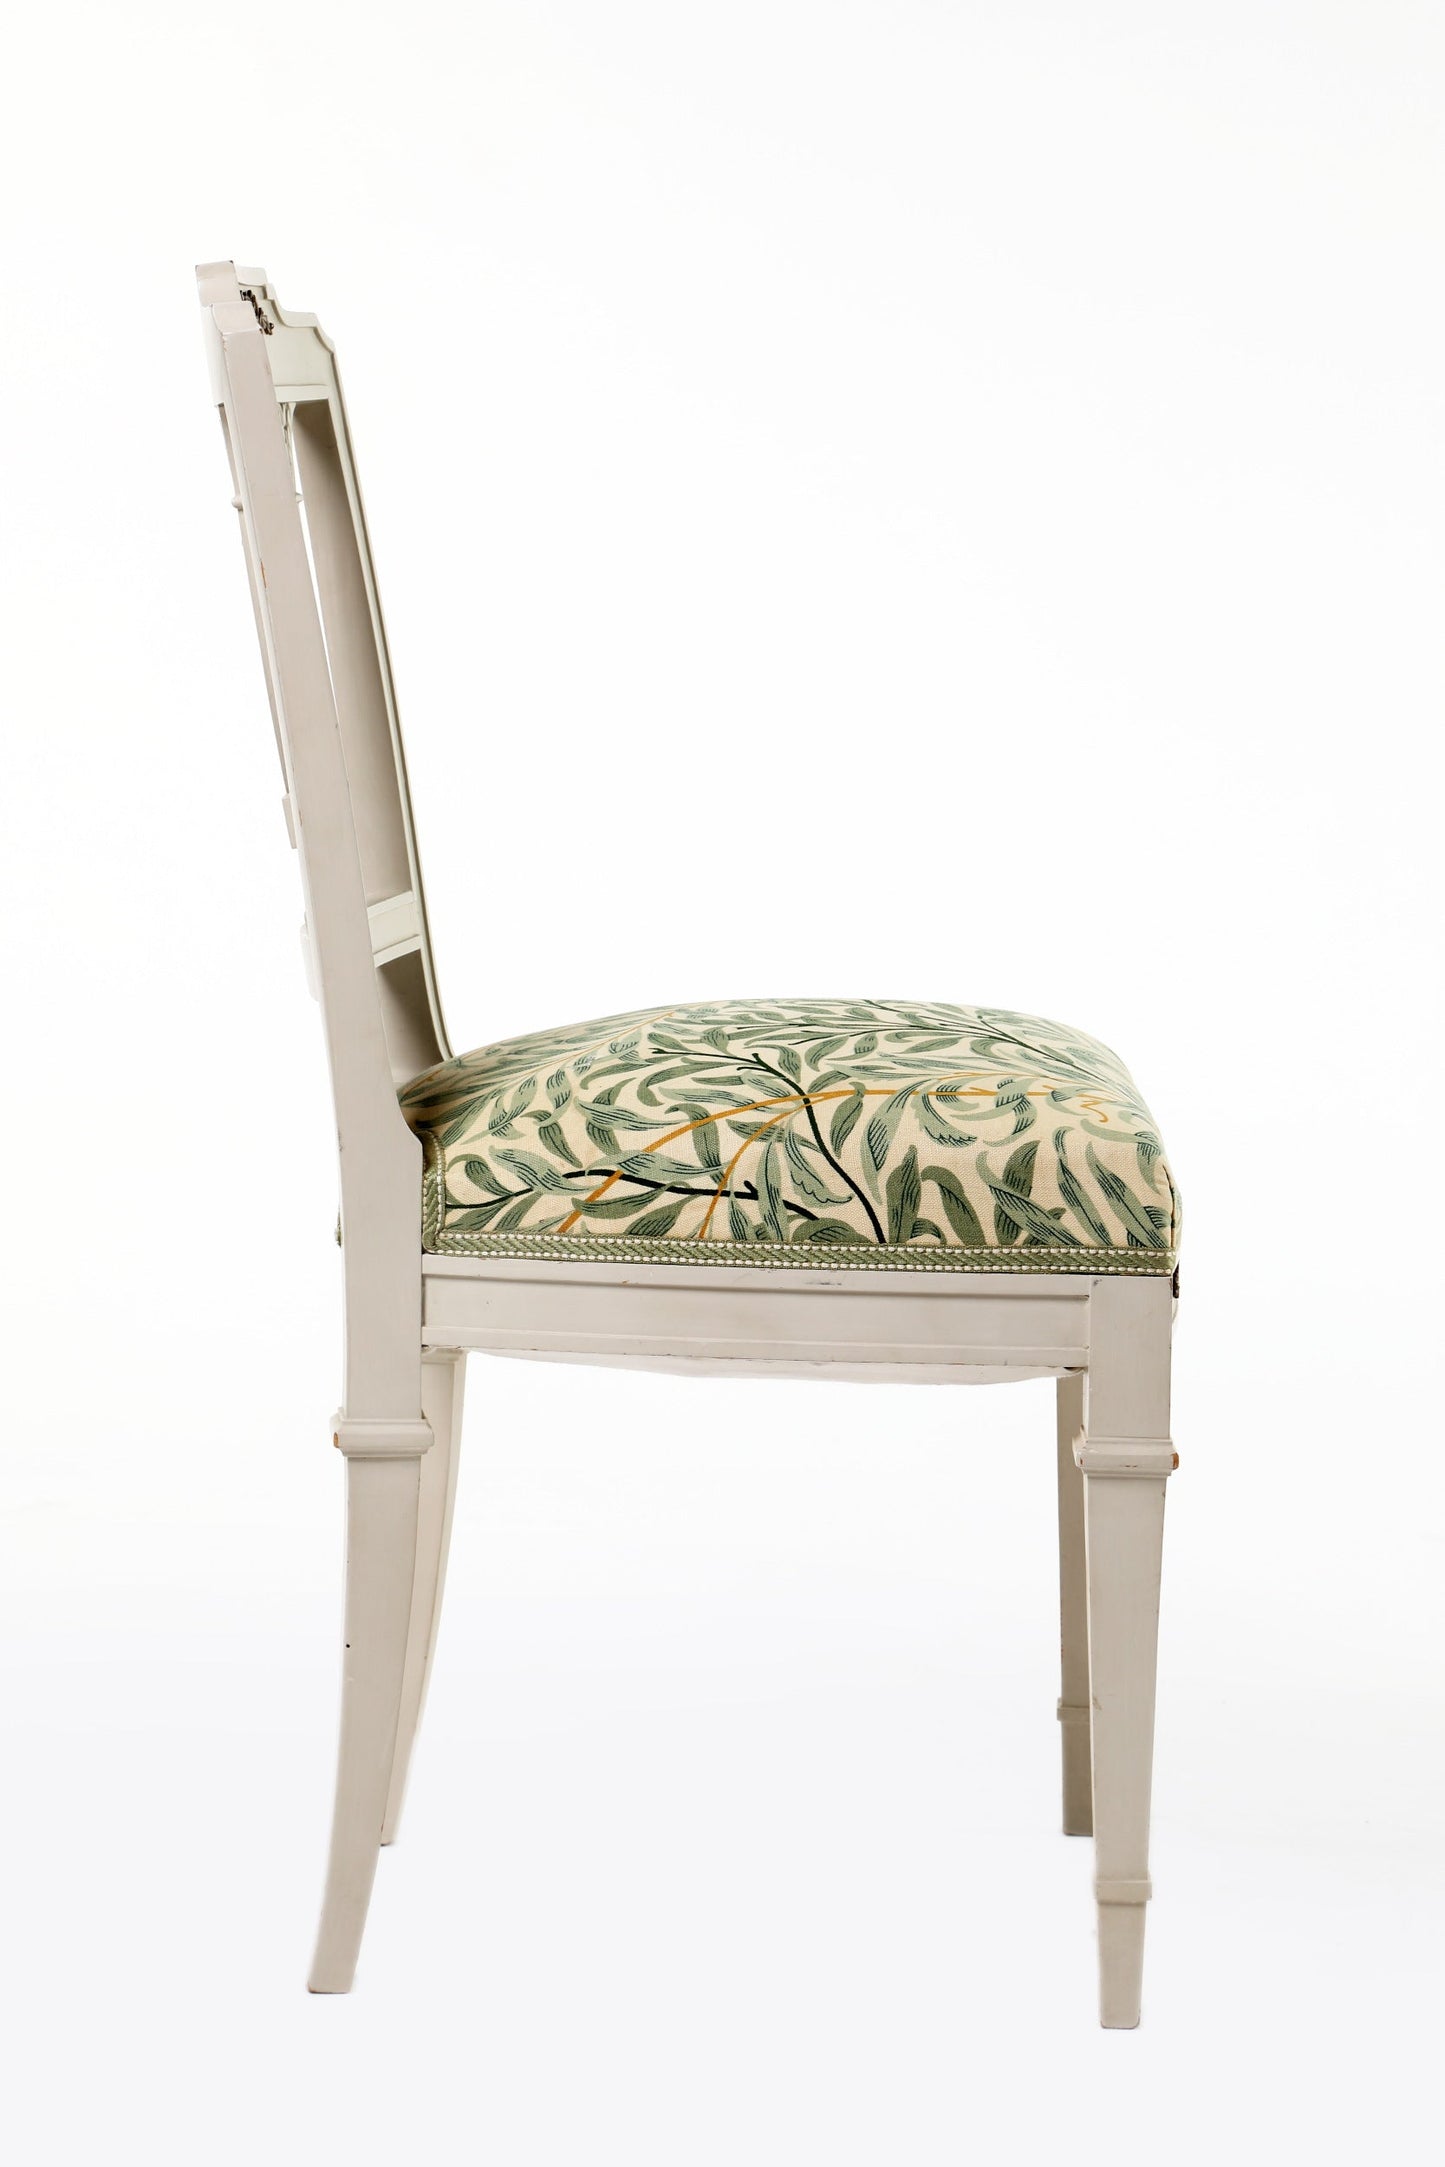 1950s chair in ivory lacquered leaf print